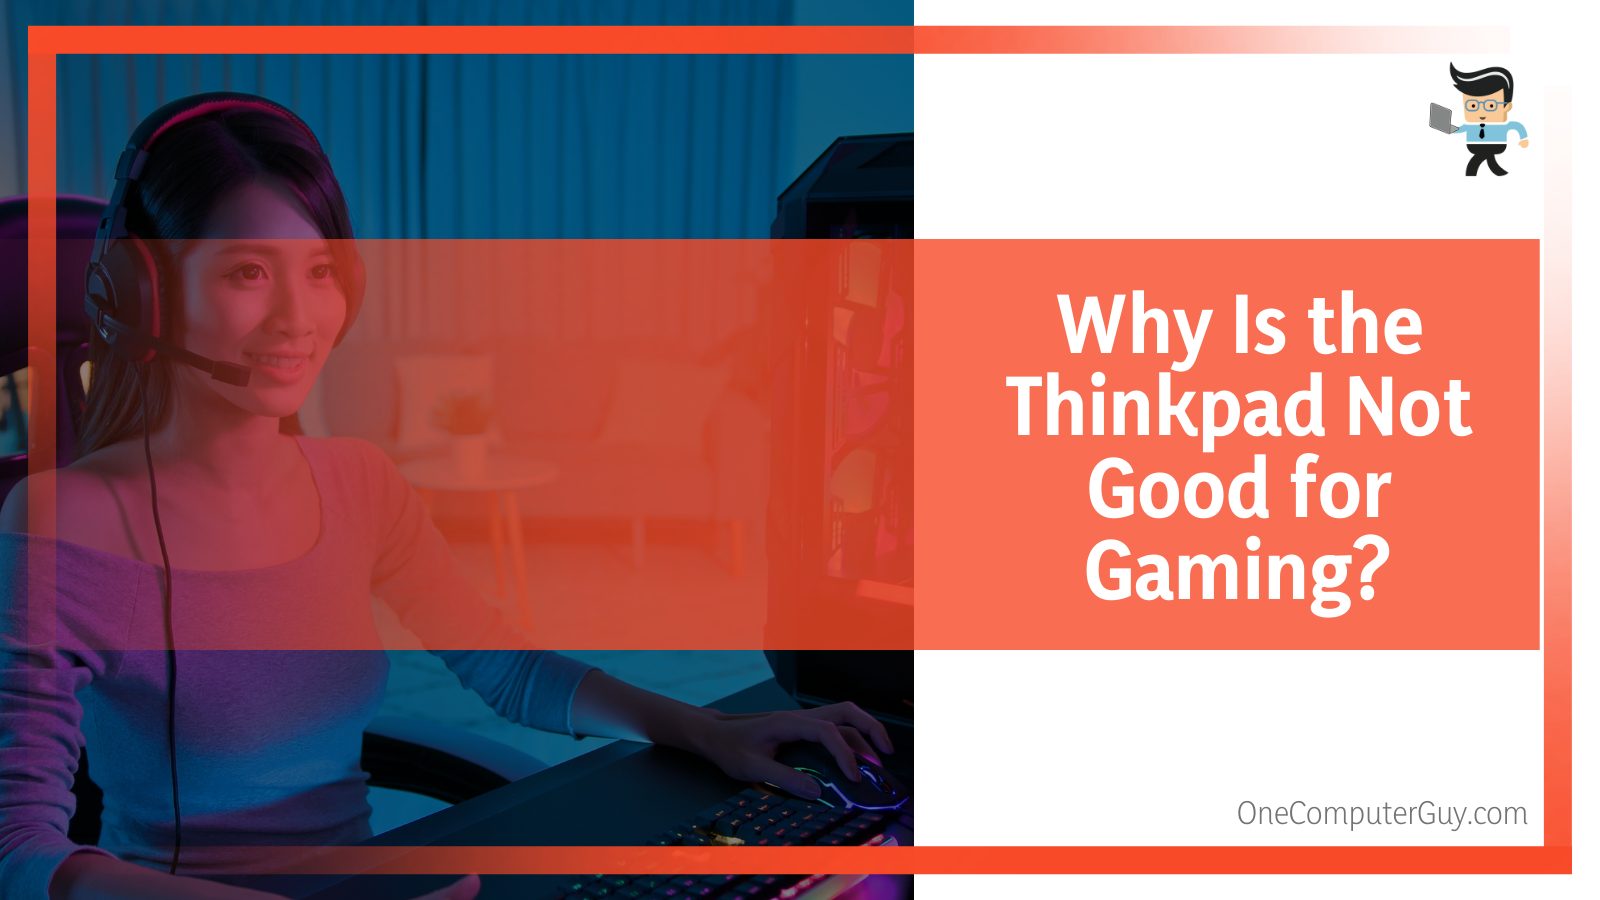 Why Is the Thinkpad Not Good for Gaming